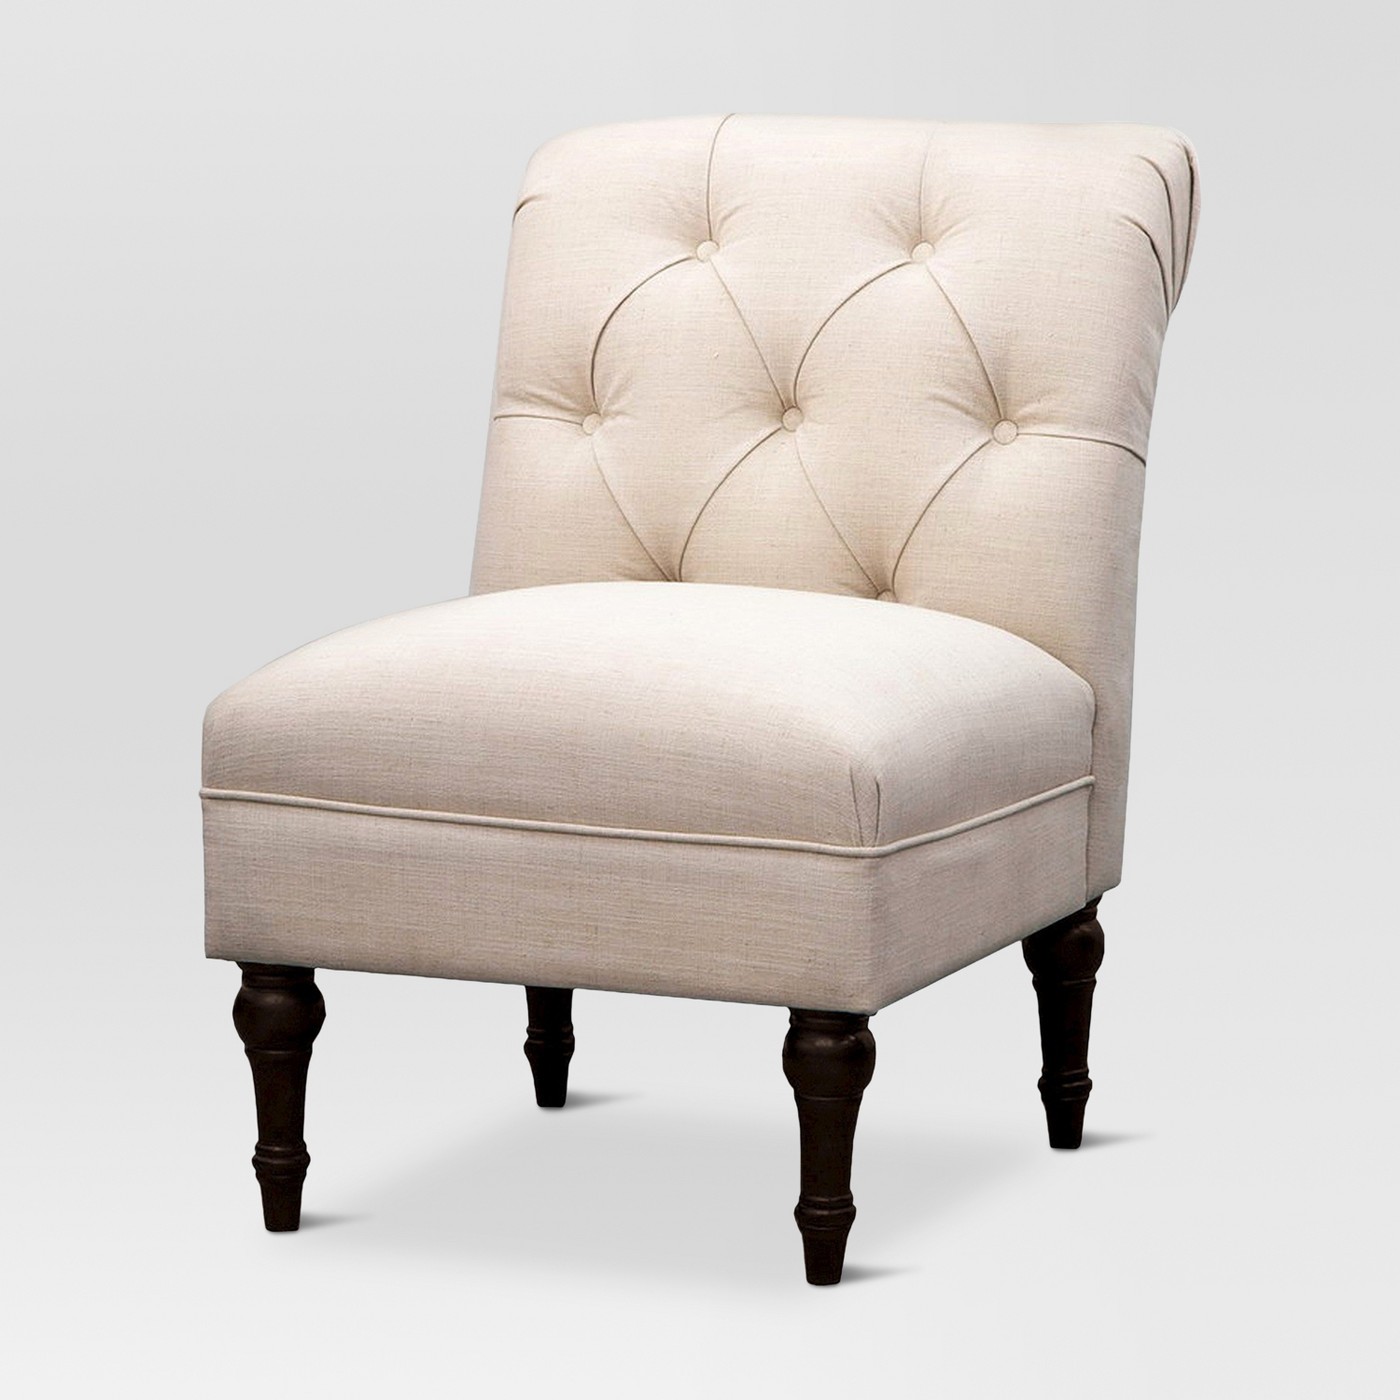 Wales Rollback Tufted Chair